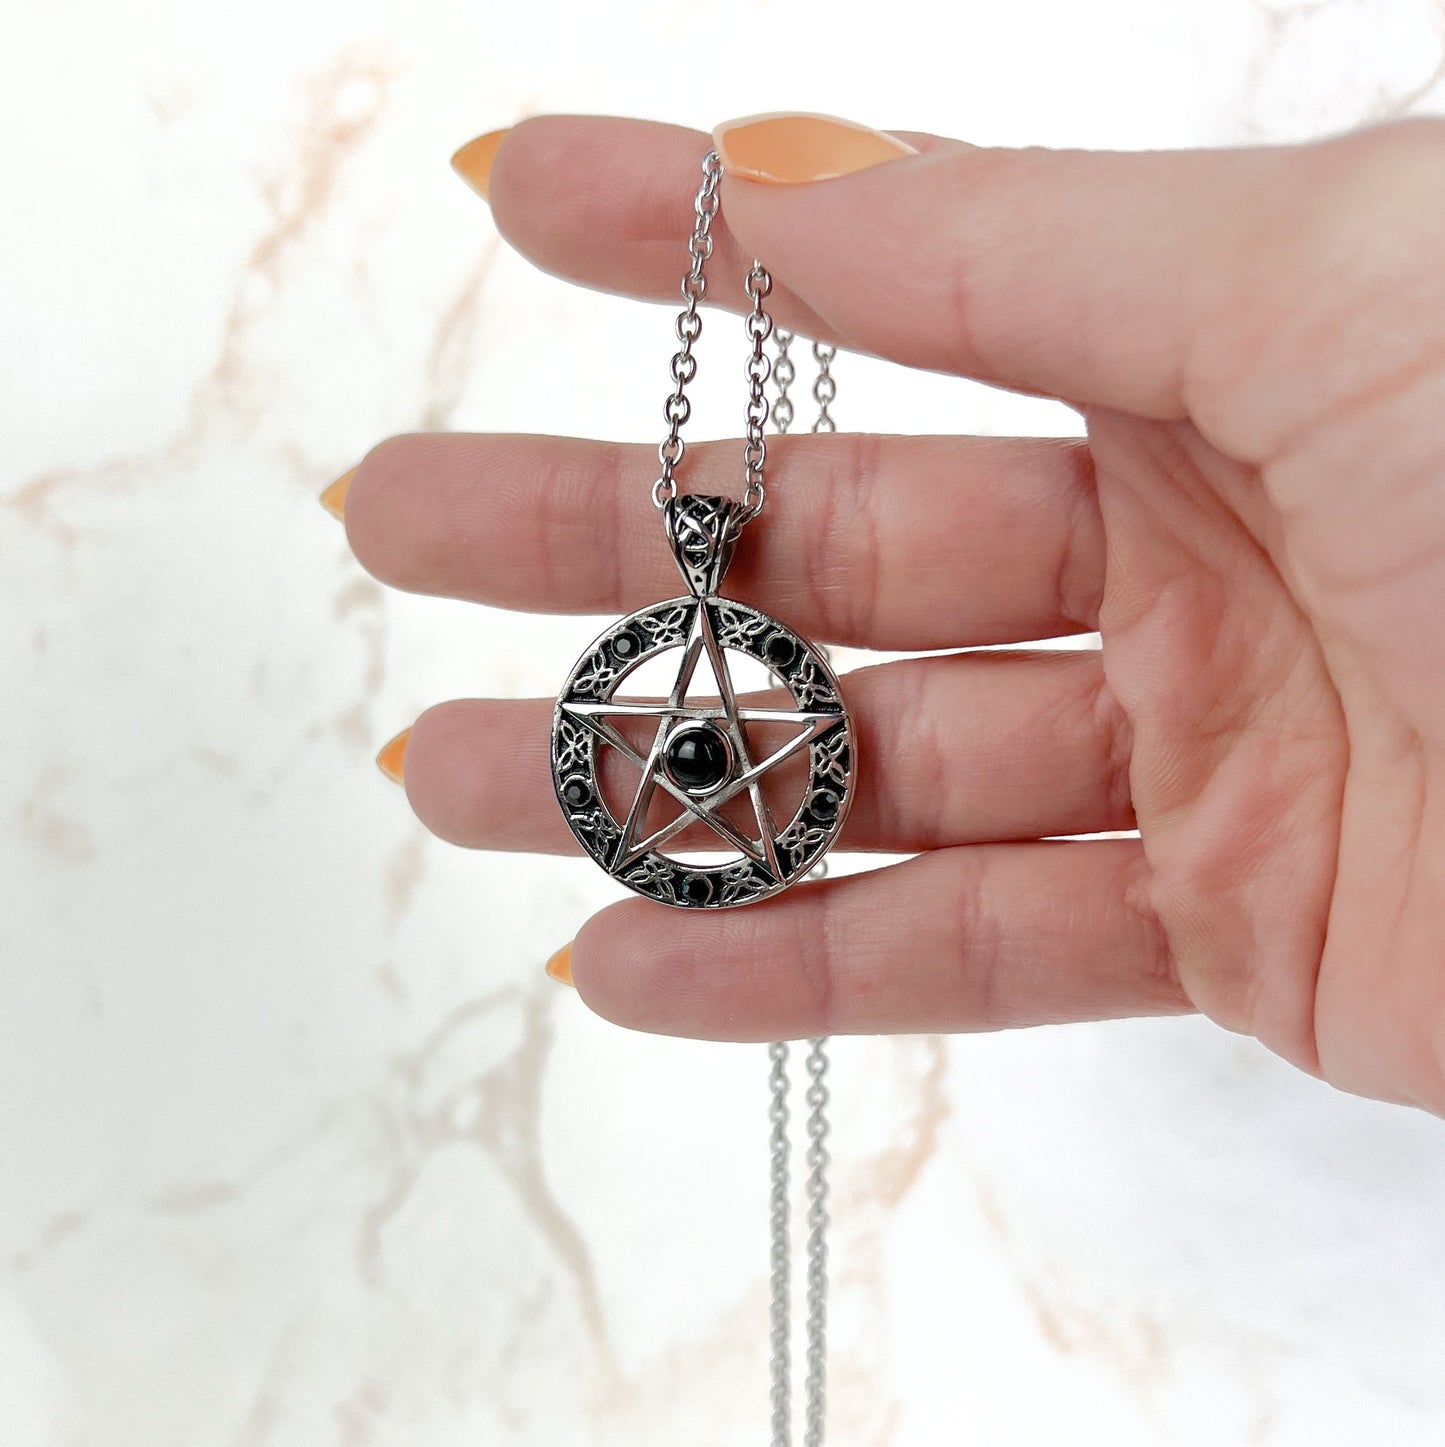 Stainless steel pentacle with black beads witchcraft necklace Baguette Magick